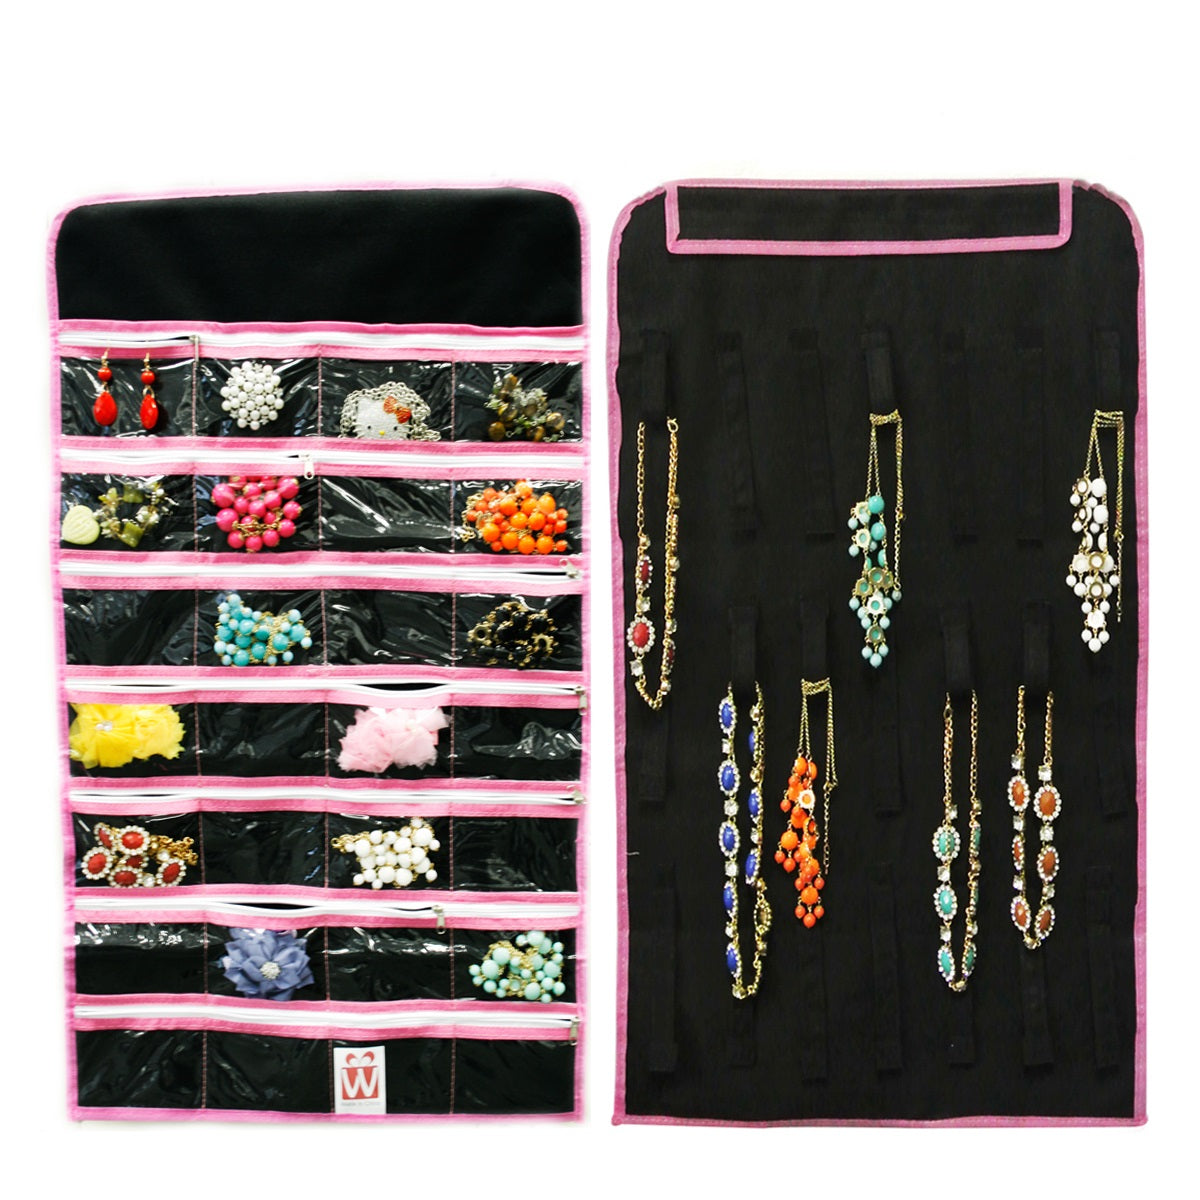 Wrapables 28 Zippered Pockets Hanging Jewelry Organizer with 21 Holding Loops Black